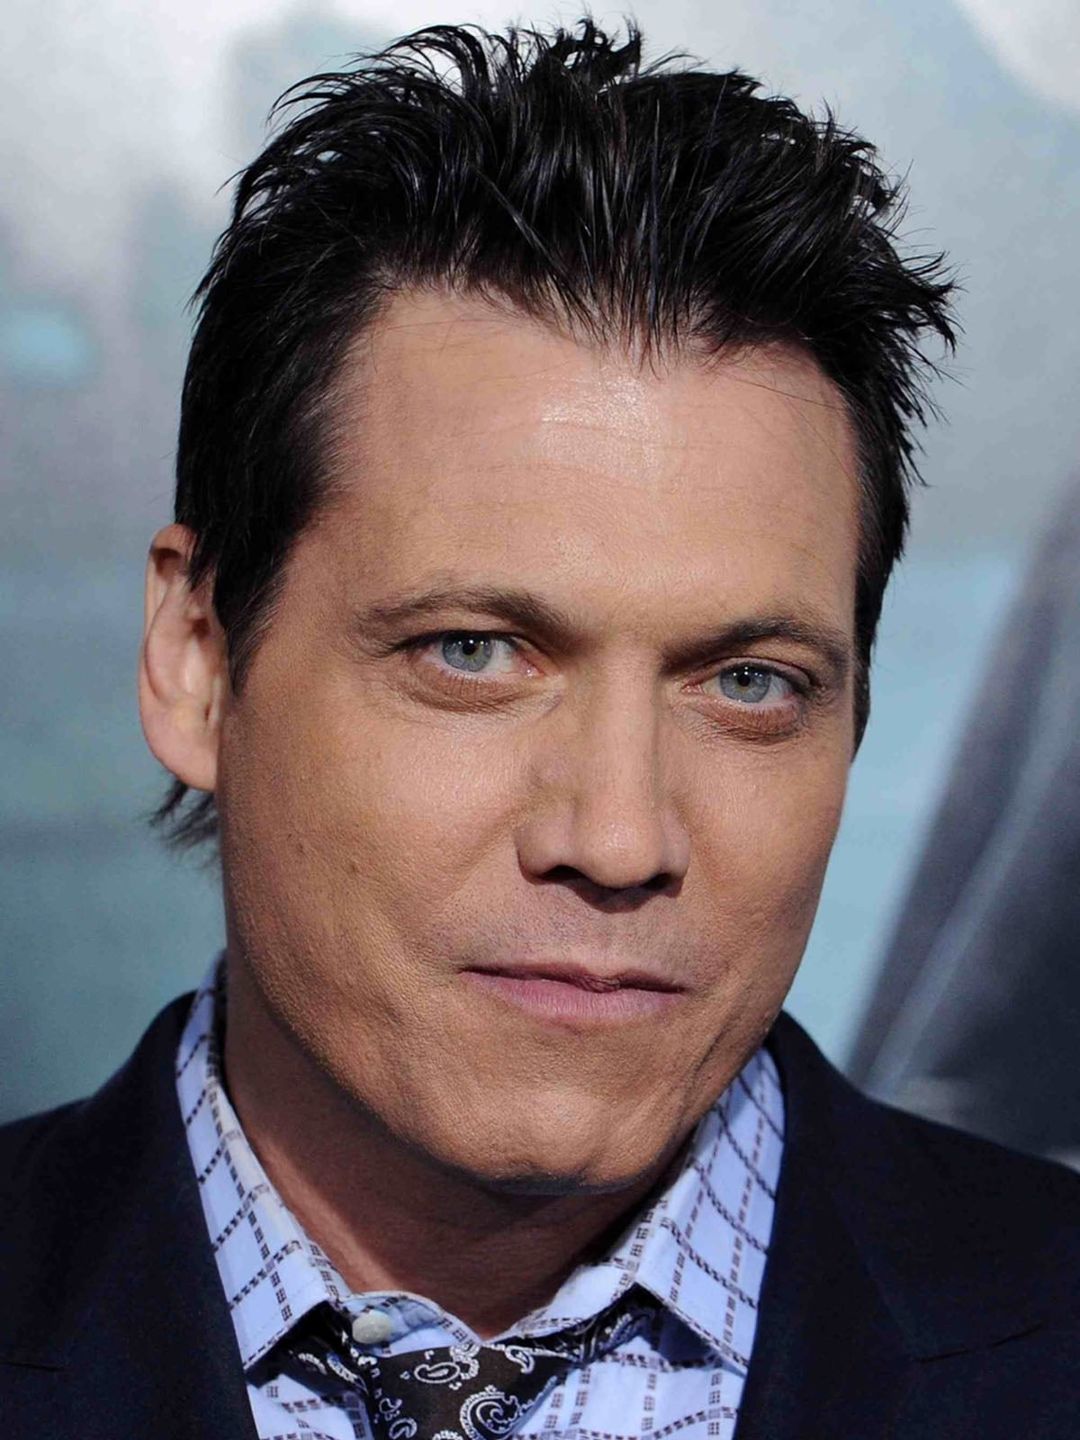 Holt McCallany life story